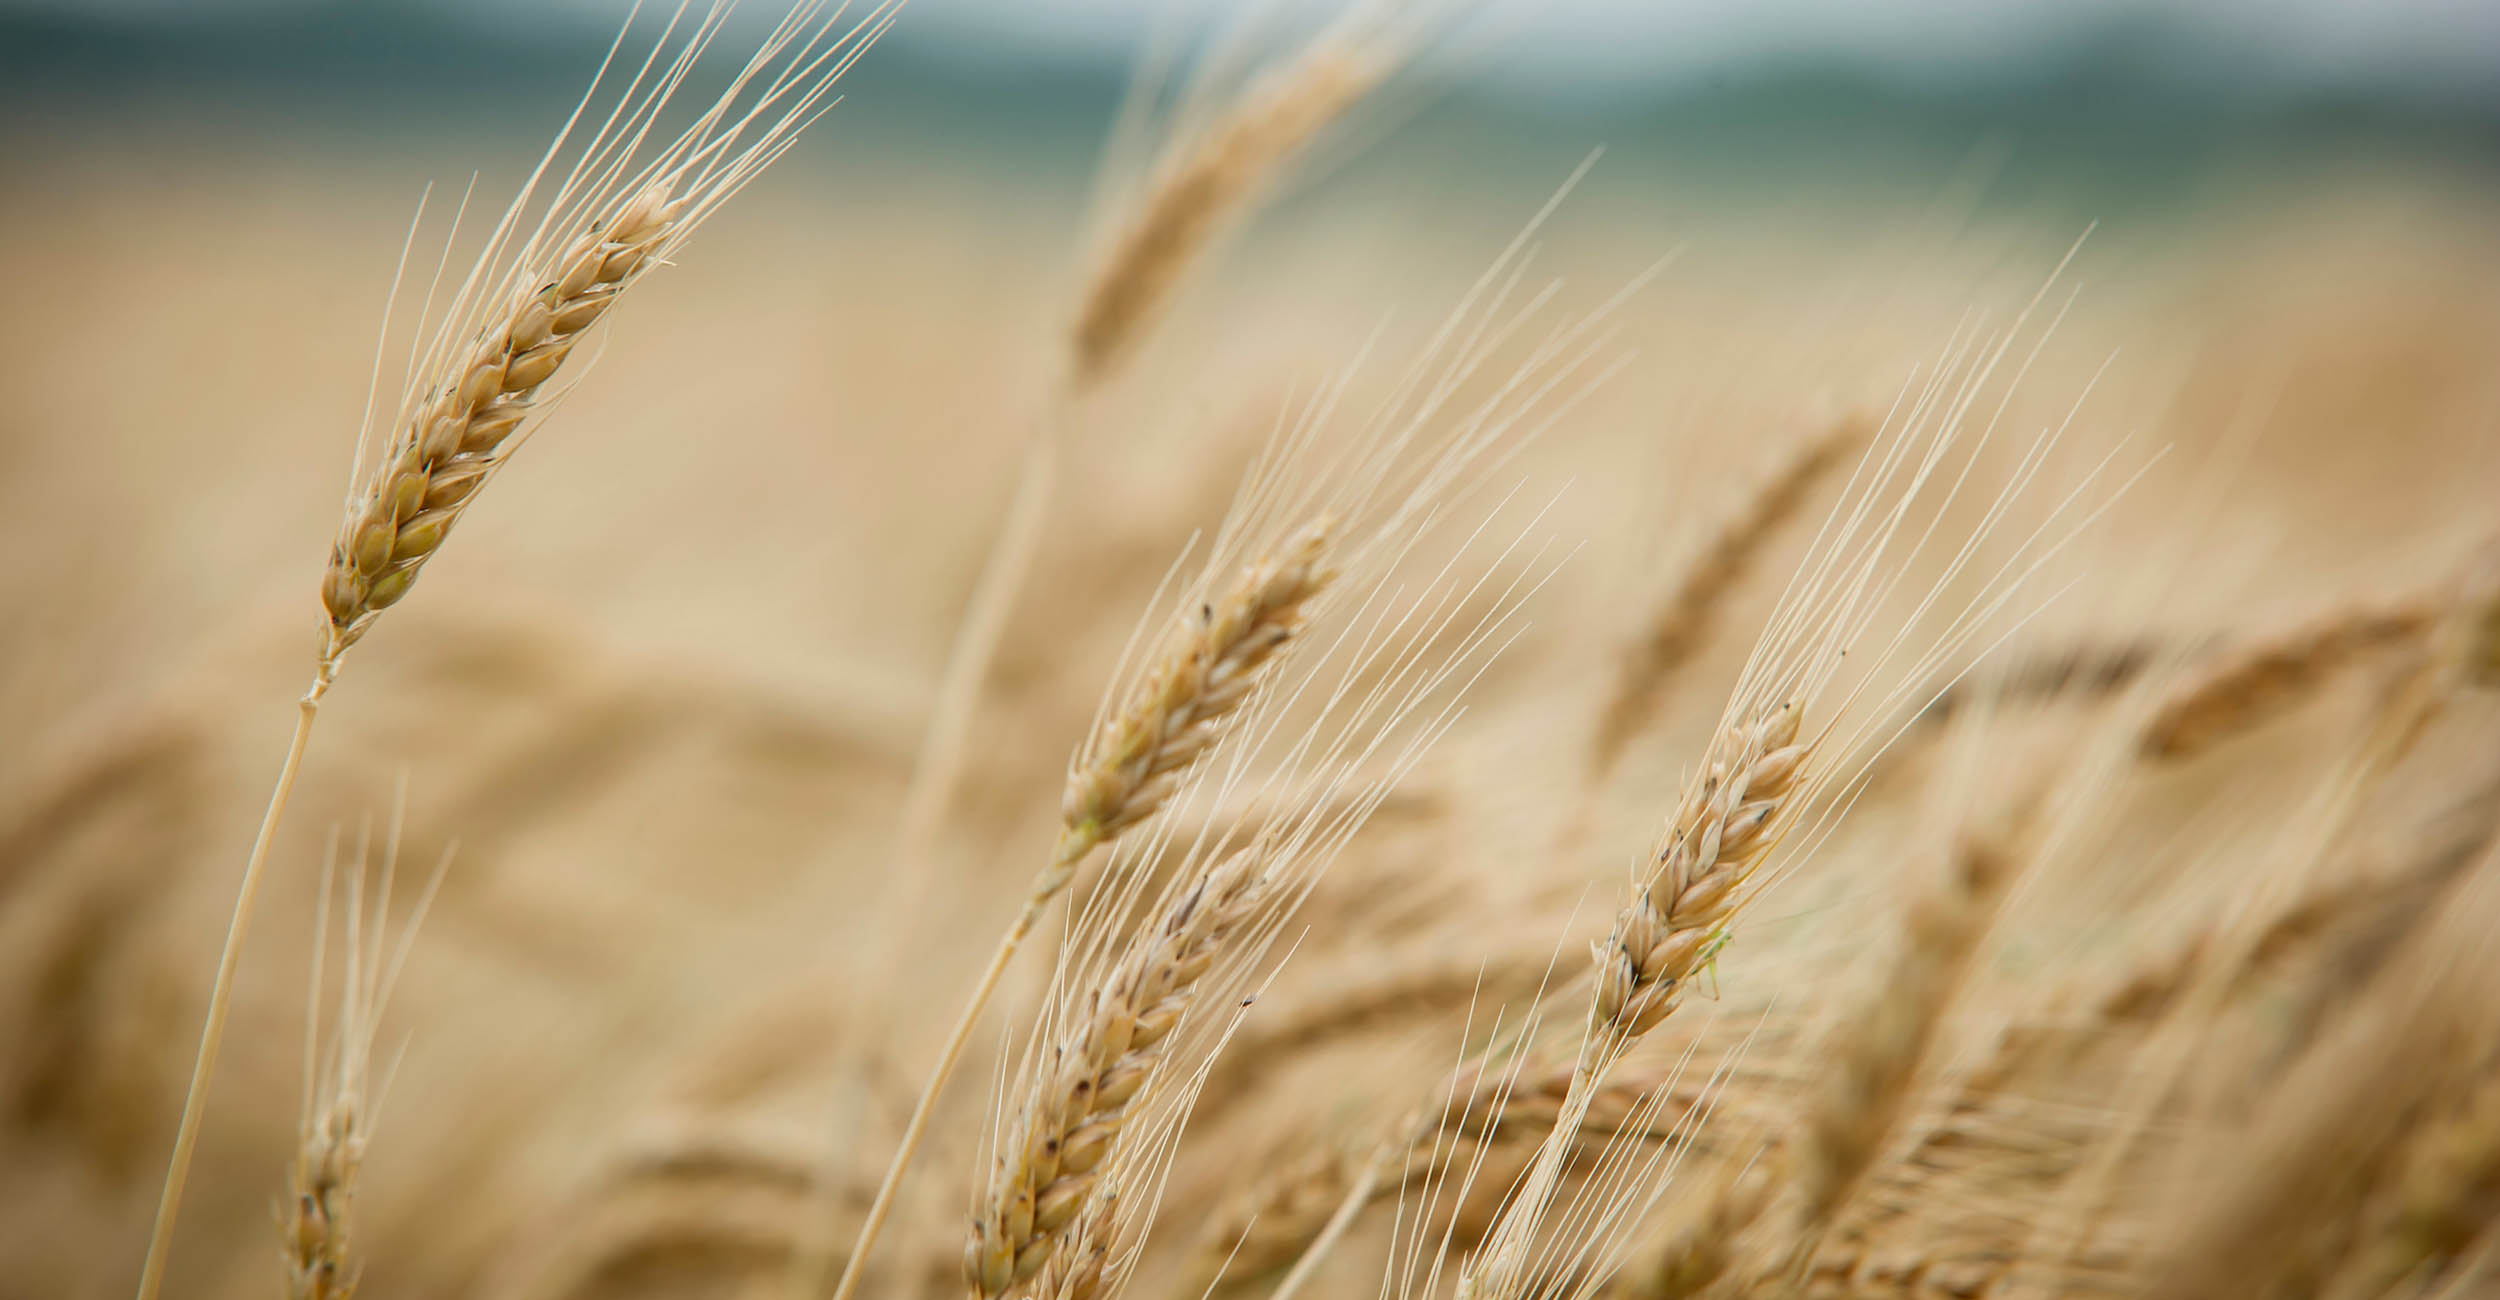 Close up image of wheat in a wheat field